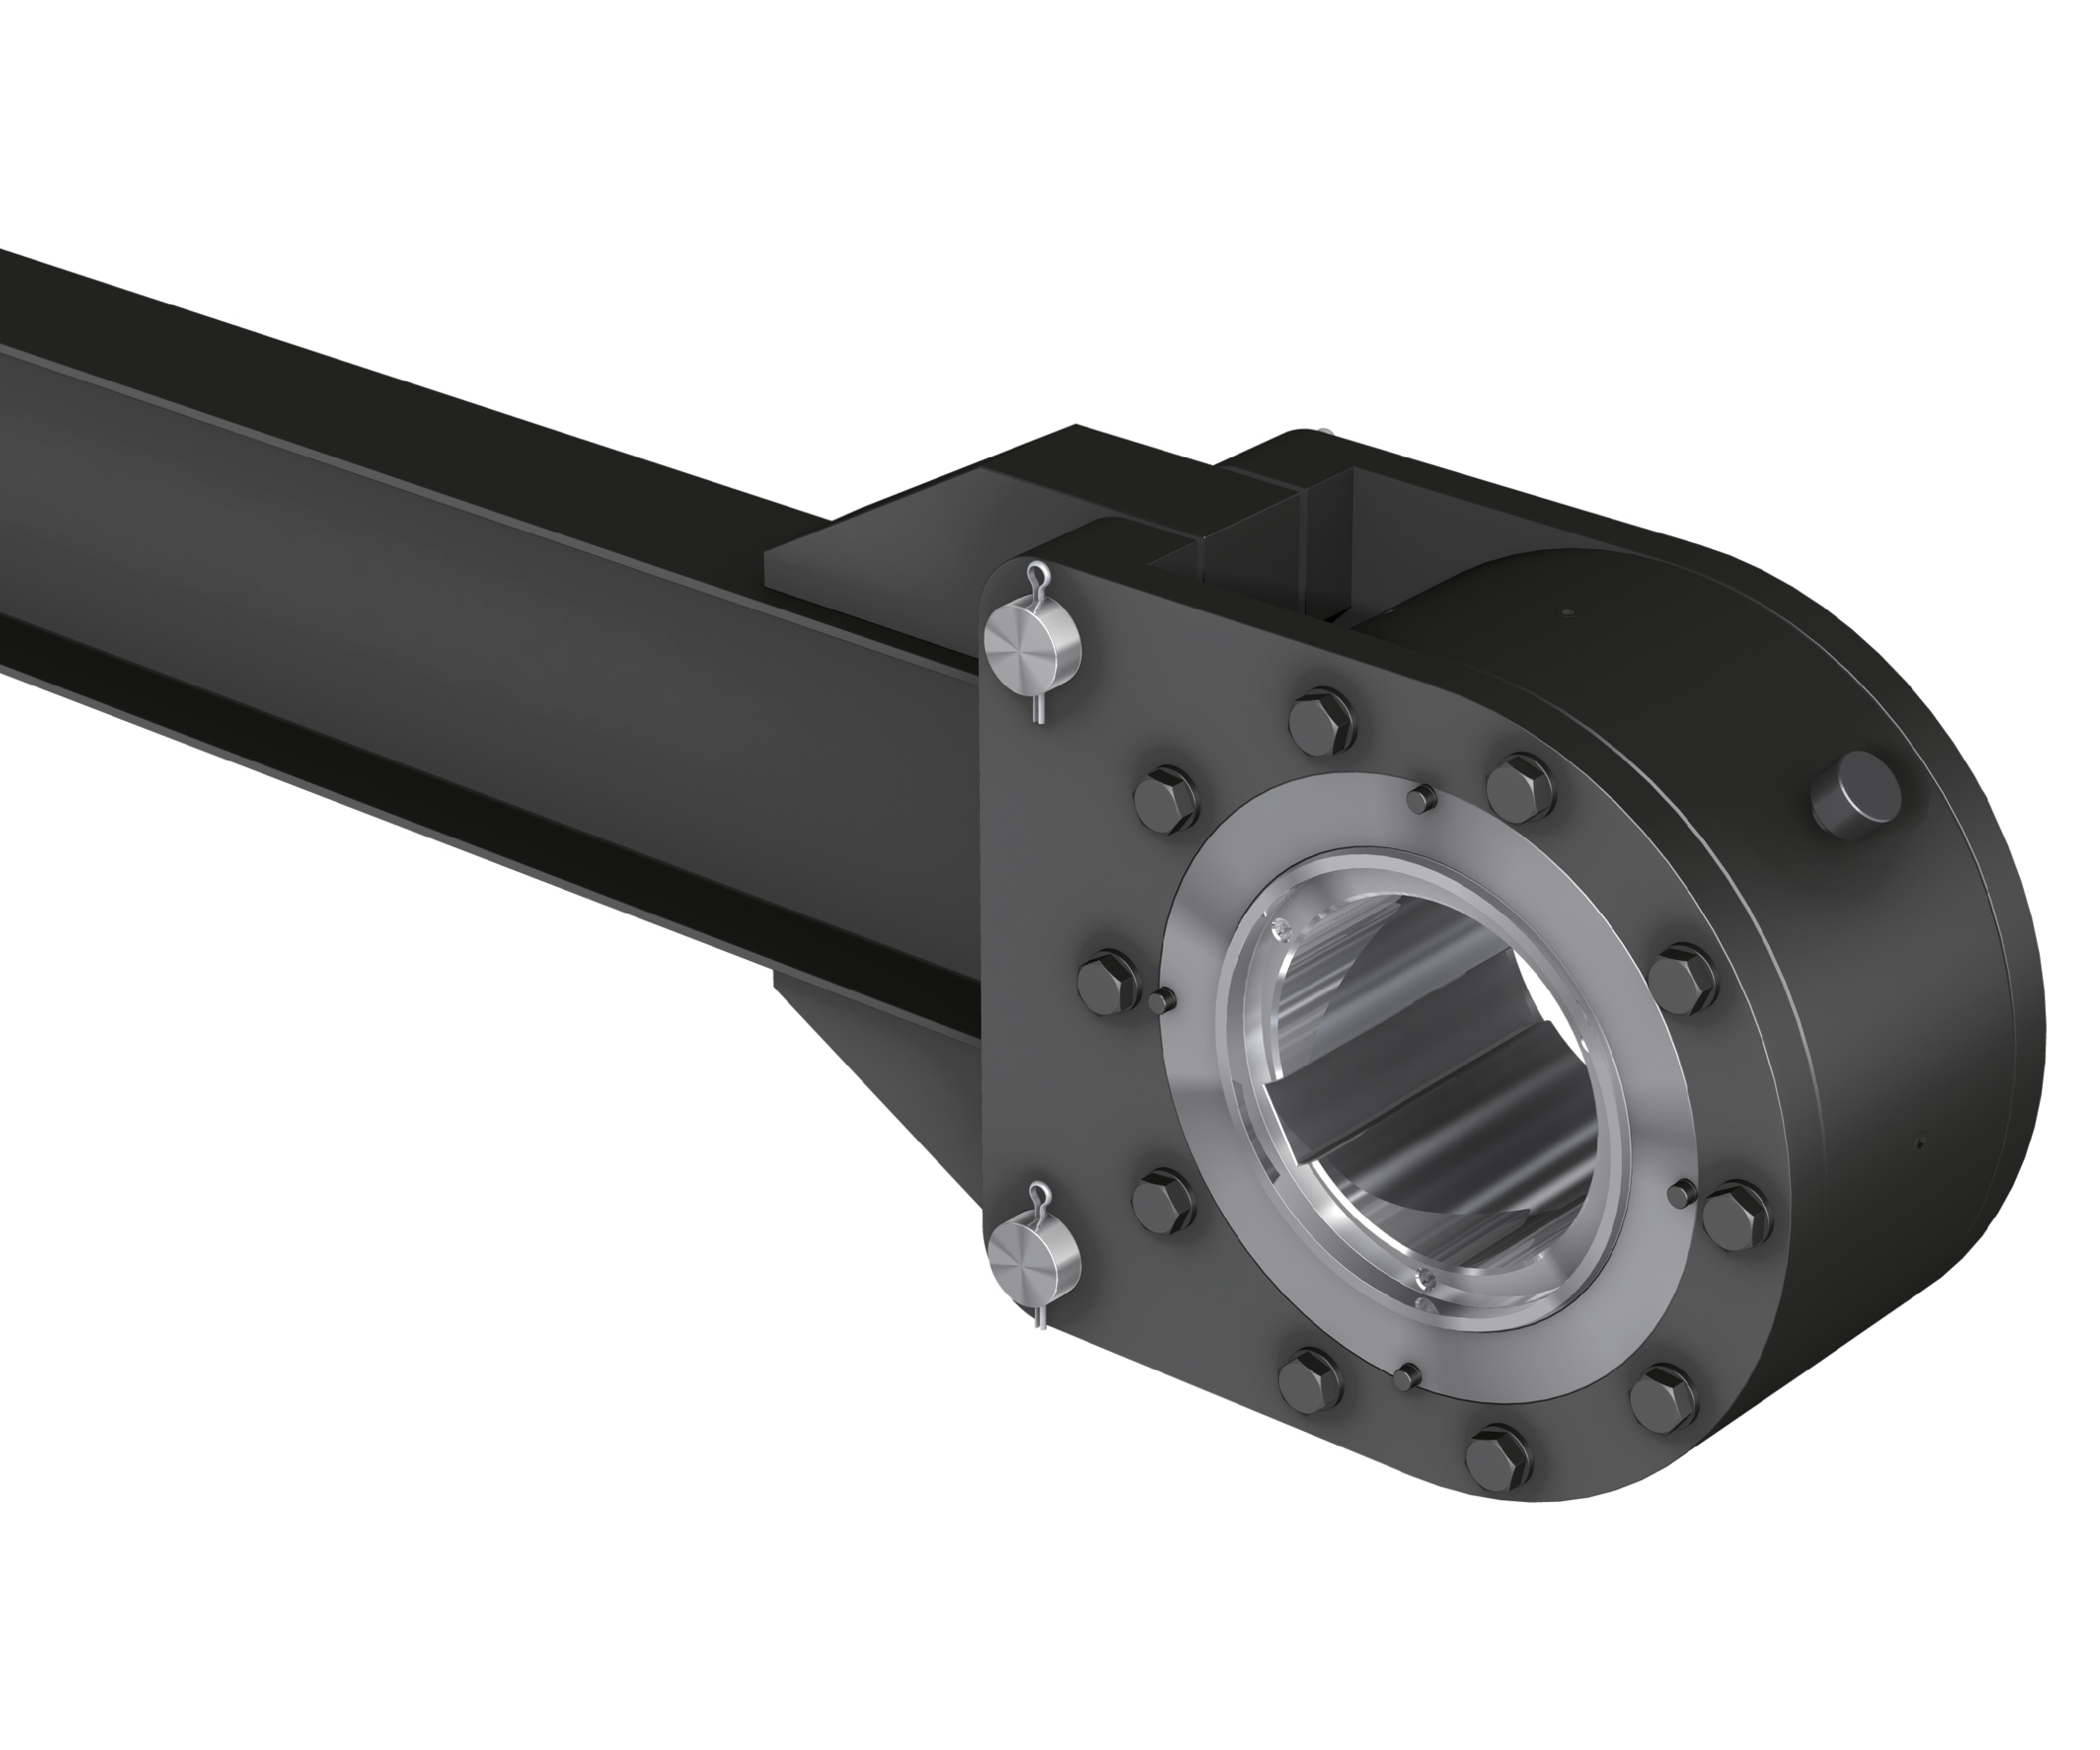 Tsubaki's BS-F Cam Clutch is ideal for inclined conveyor backstop applications. When backstopping under excessive load, the inner race stays stationary thanks to the non-rollover cam.